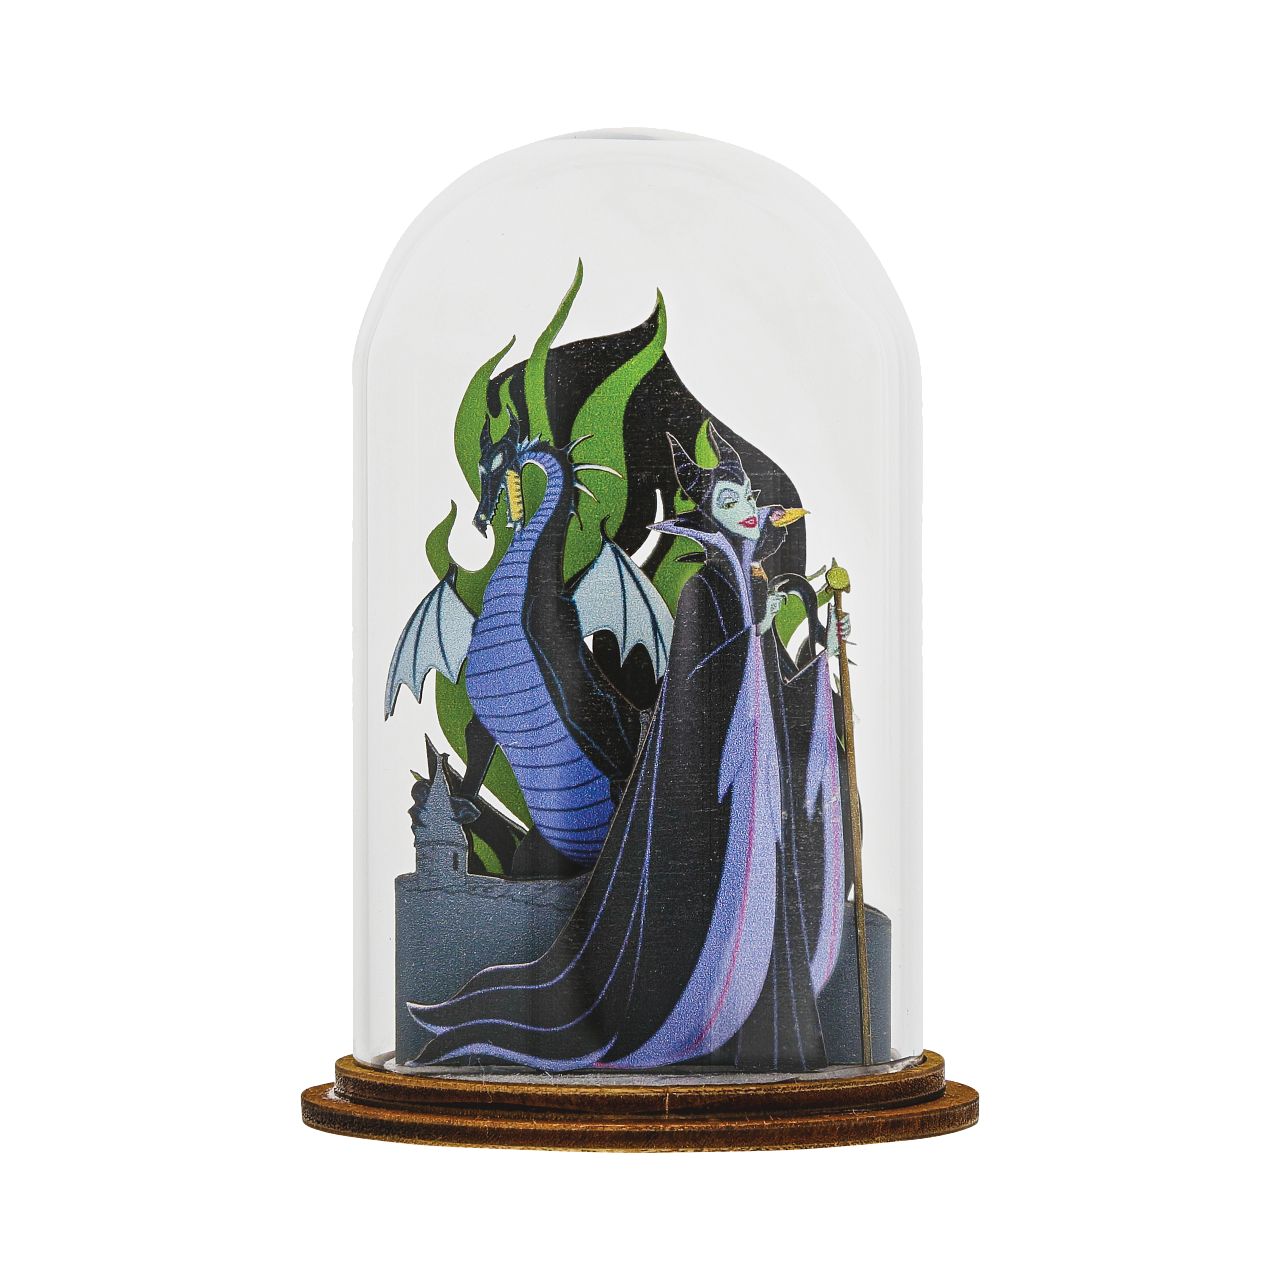 Disney Mistress of All Evil Maleficent Figurine  This stunning figurine showcases all the evil of Maleficent with her iconic dragon surrounded by green flames. This classic Sleeping Beauty decorative Kloche will make a stunning display in your home.